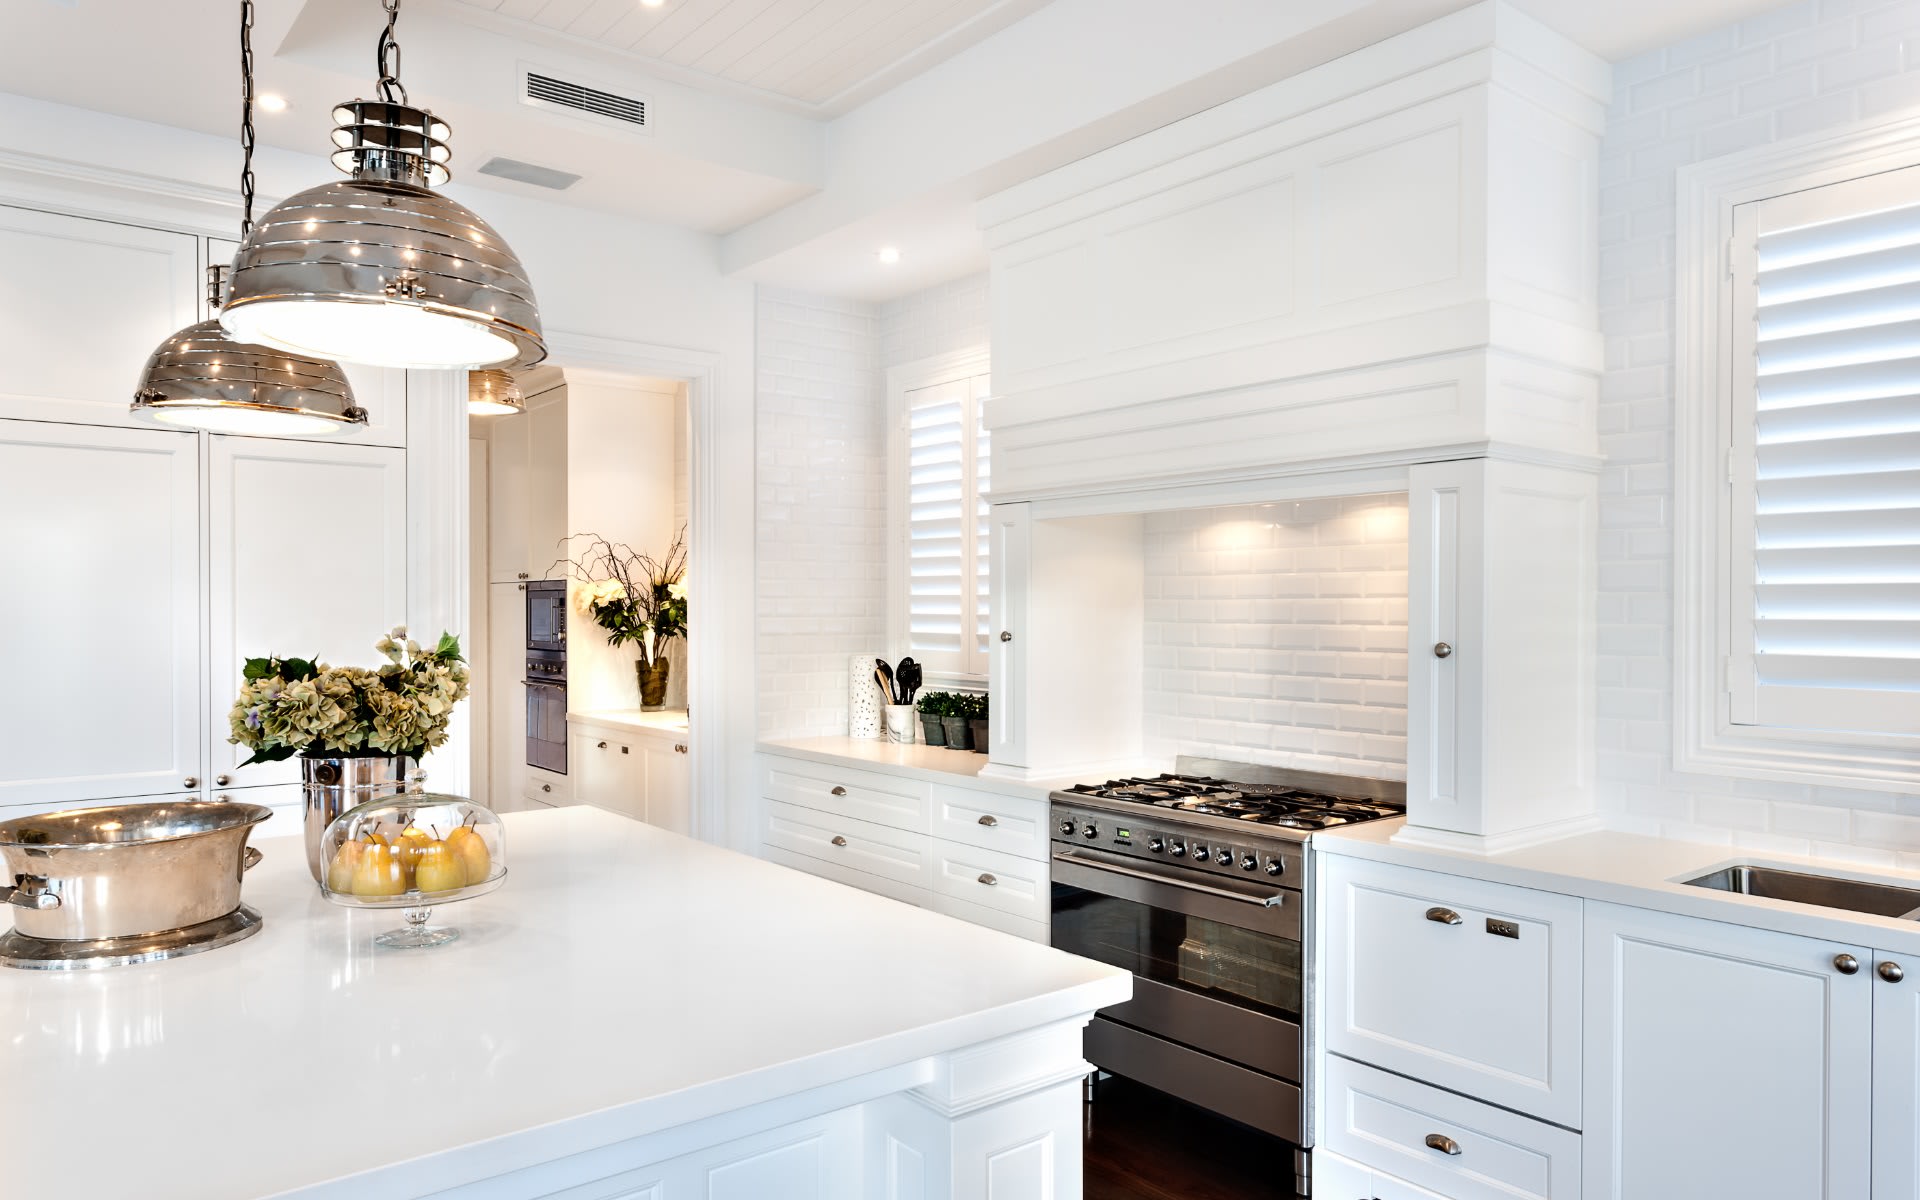 A white kitchen with a stove and a sink. The kitchen has stainless steel appliances and granite countertops.